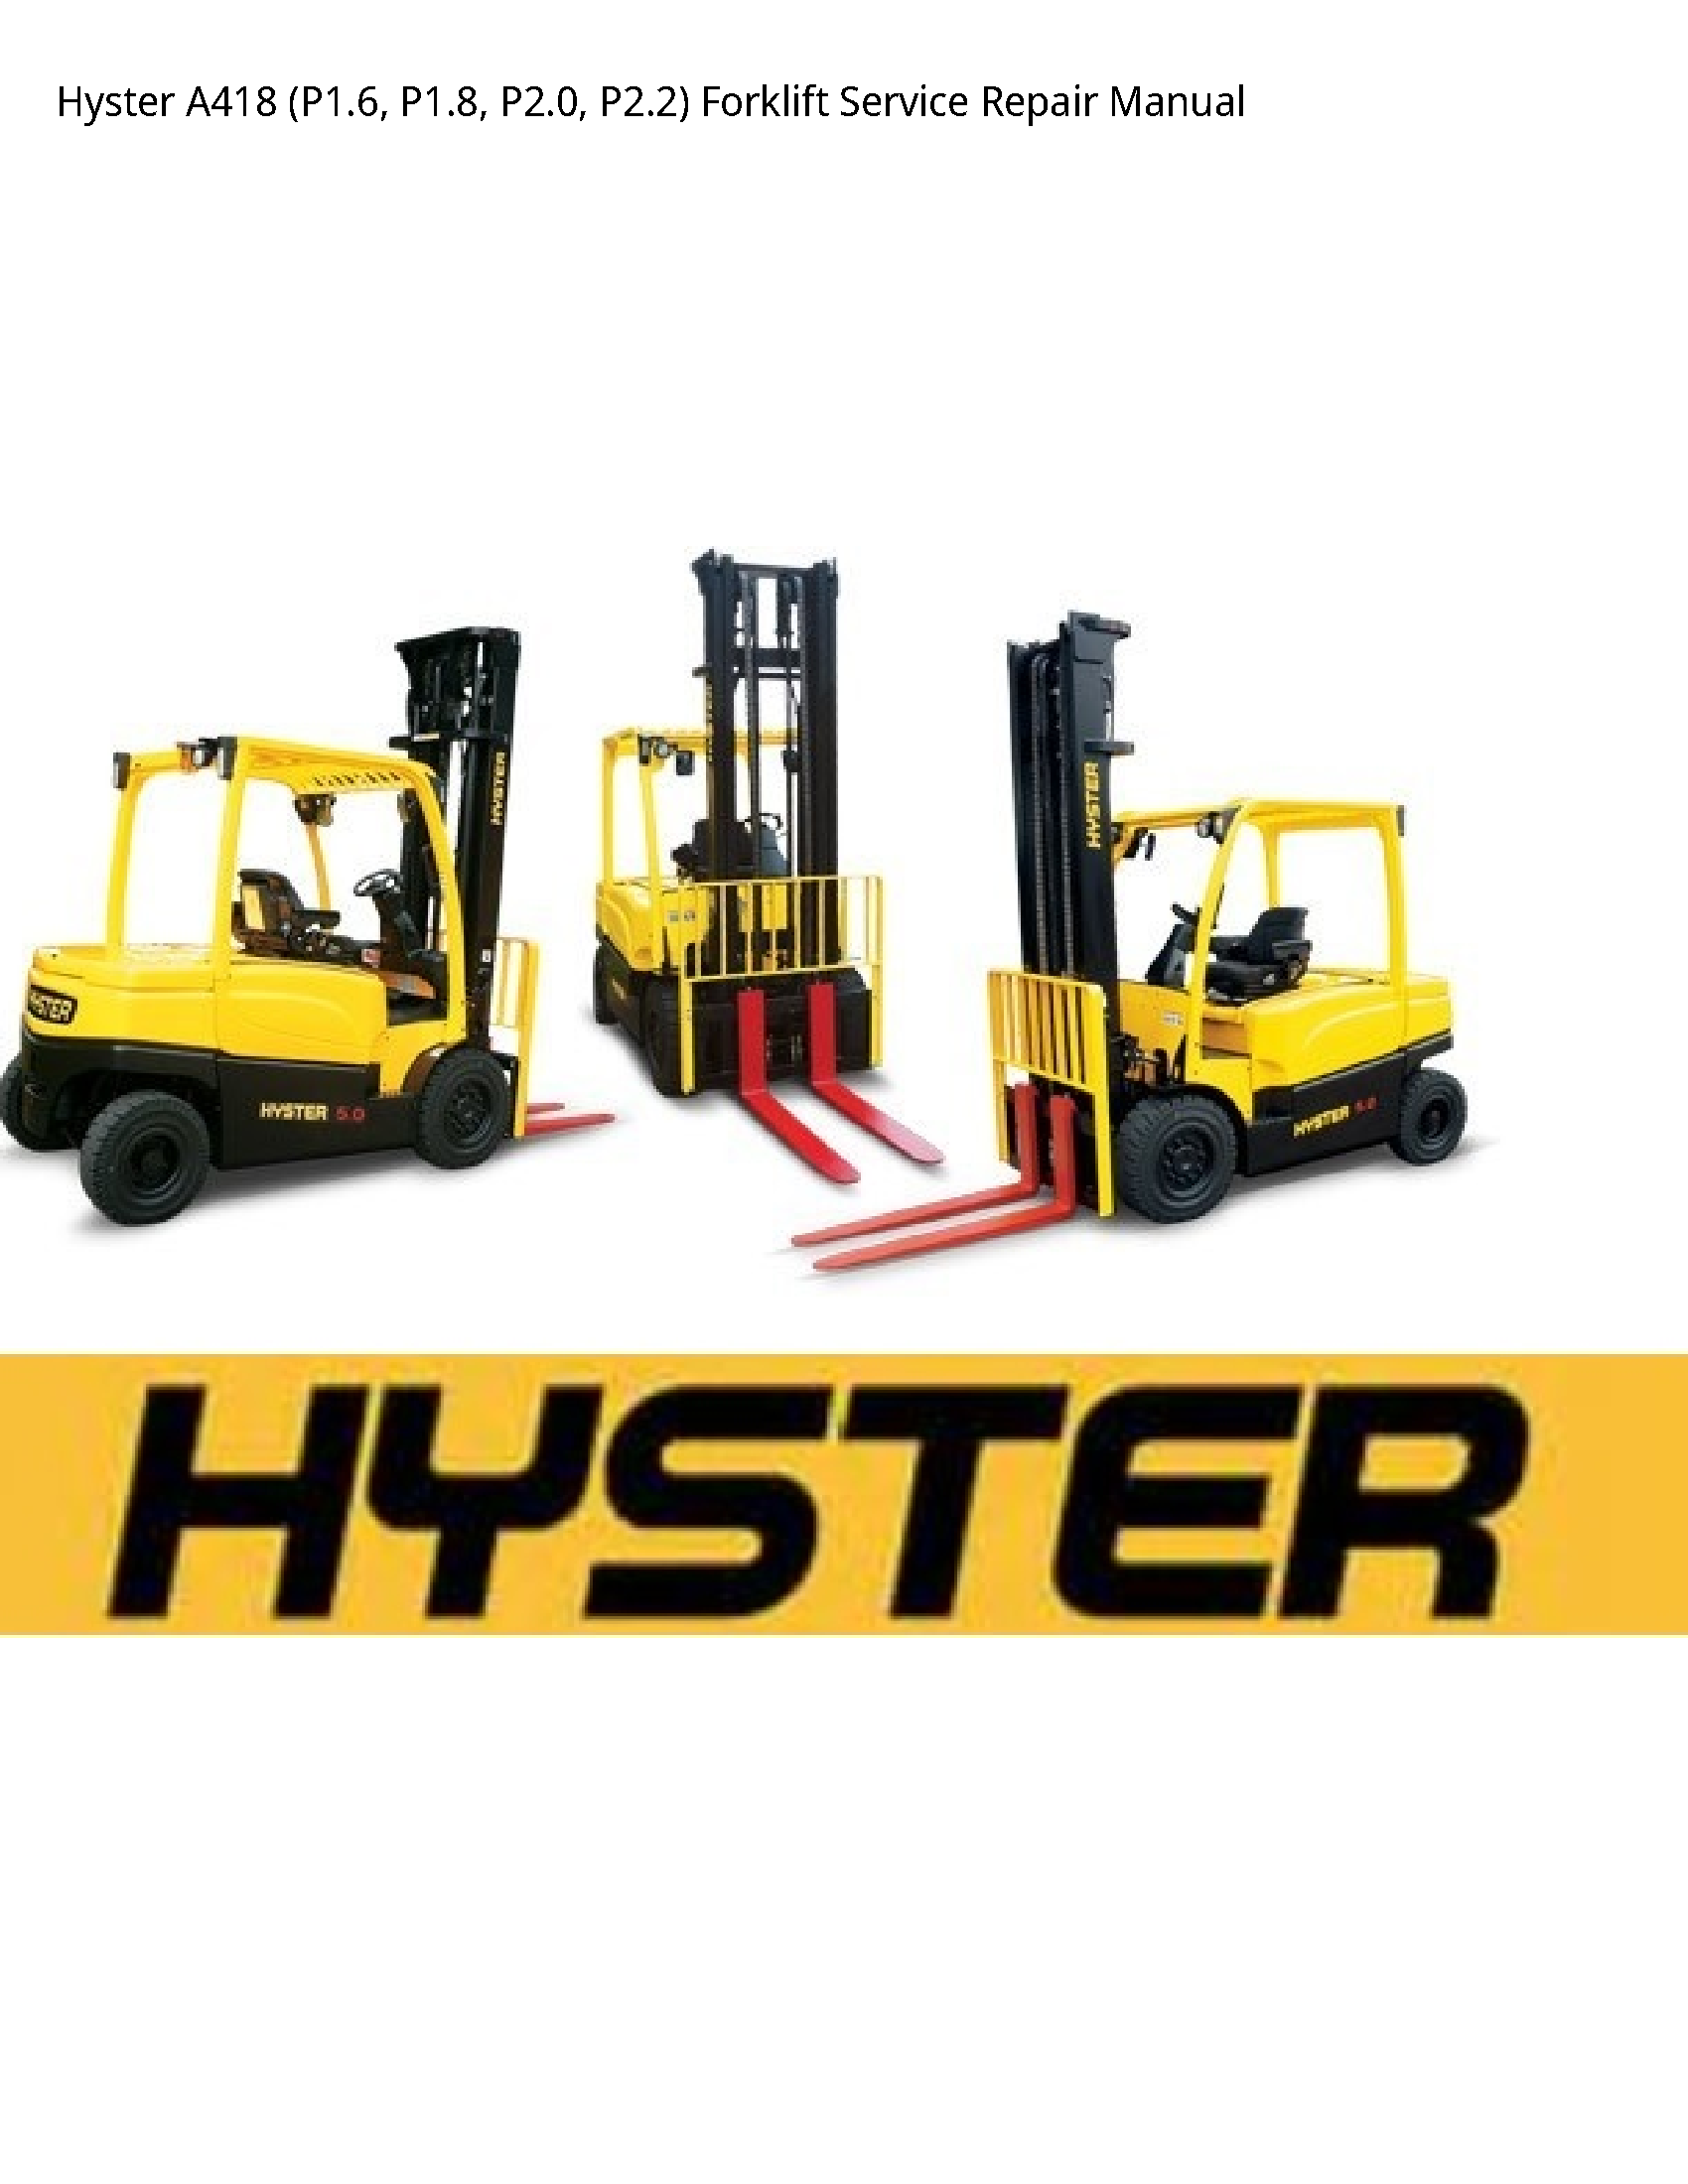 Hyster A418 Forklift manual